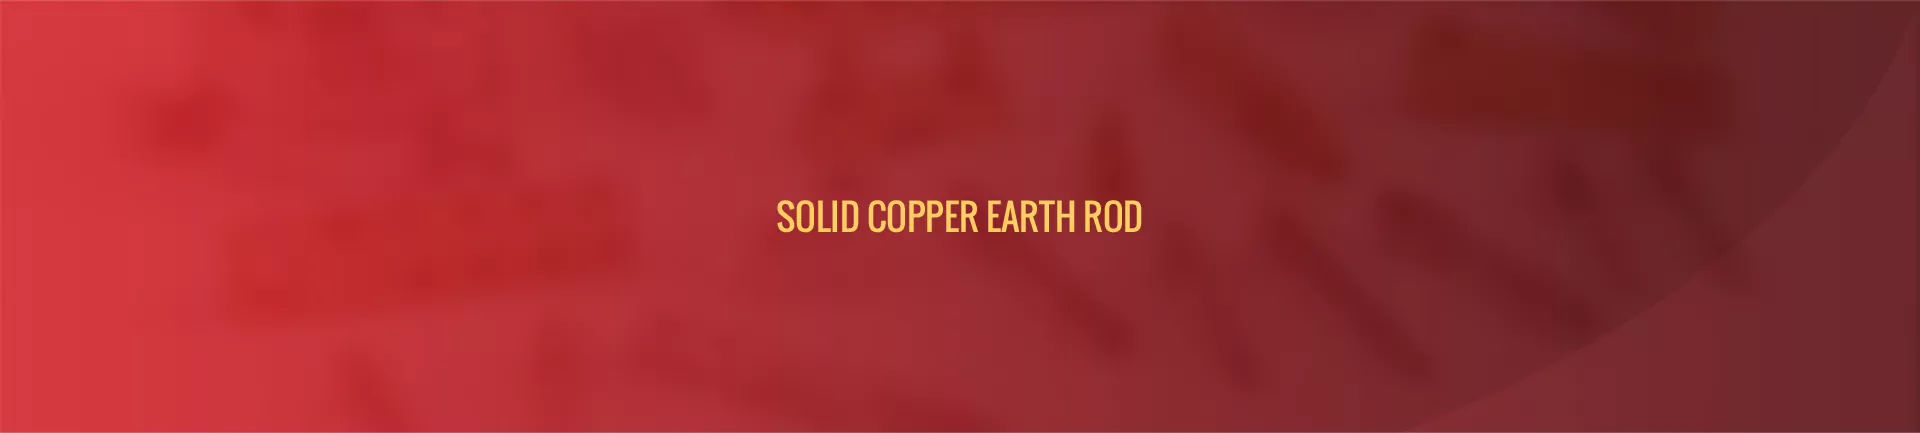 solid-copper-earth-rod-banner